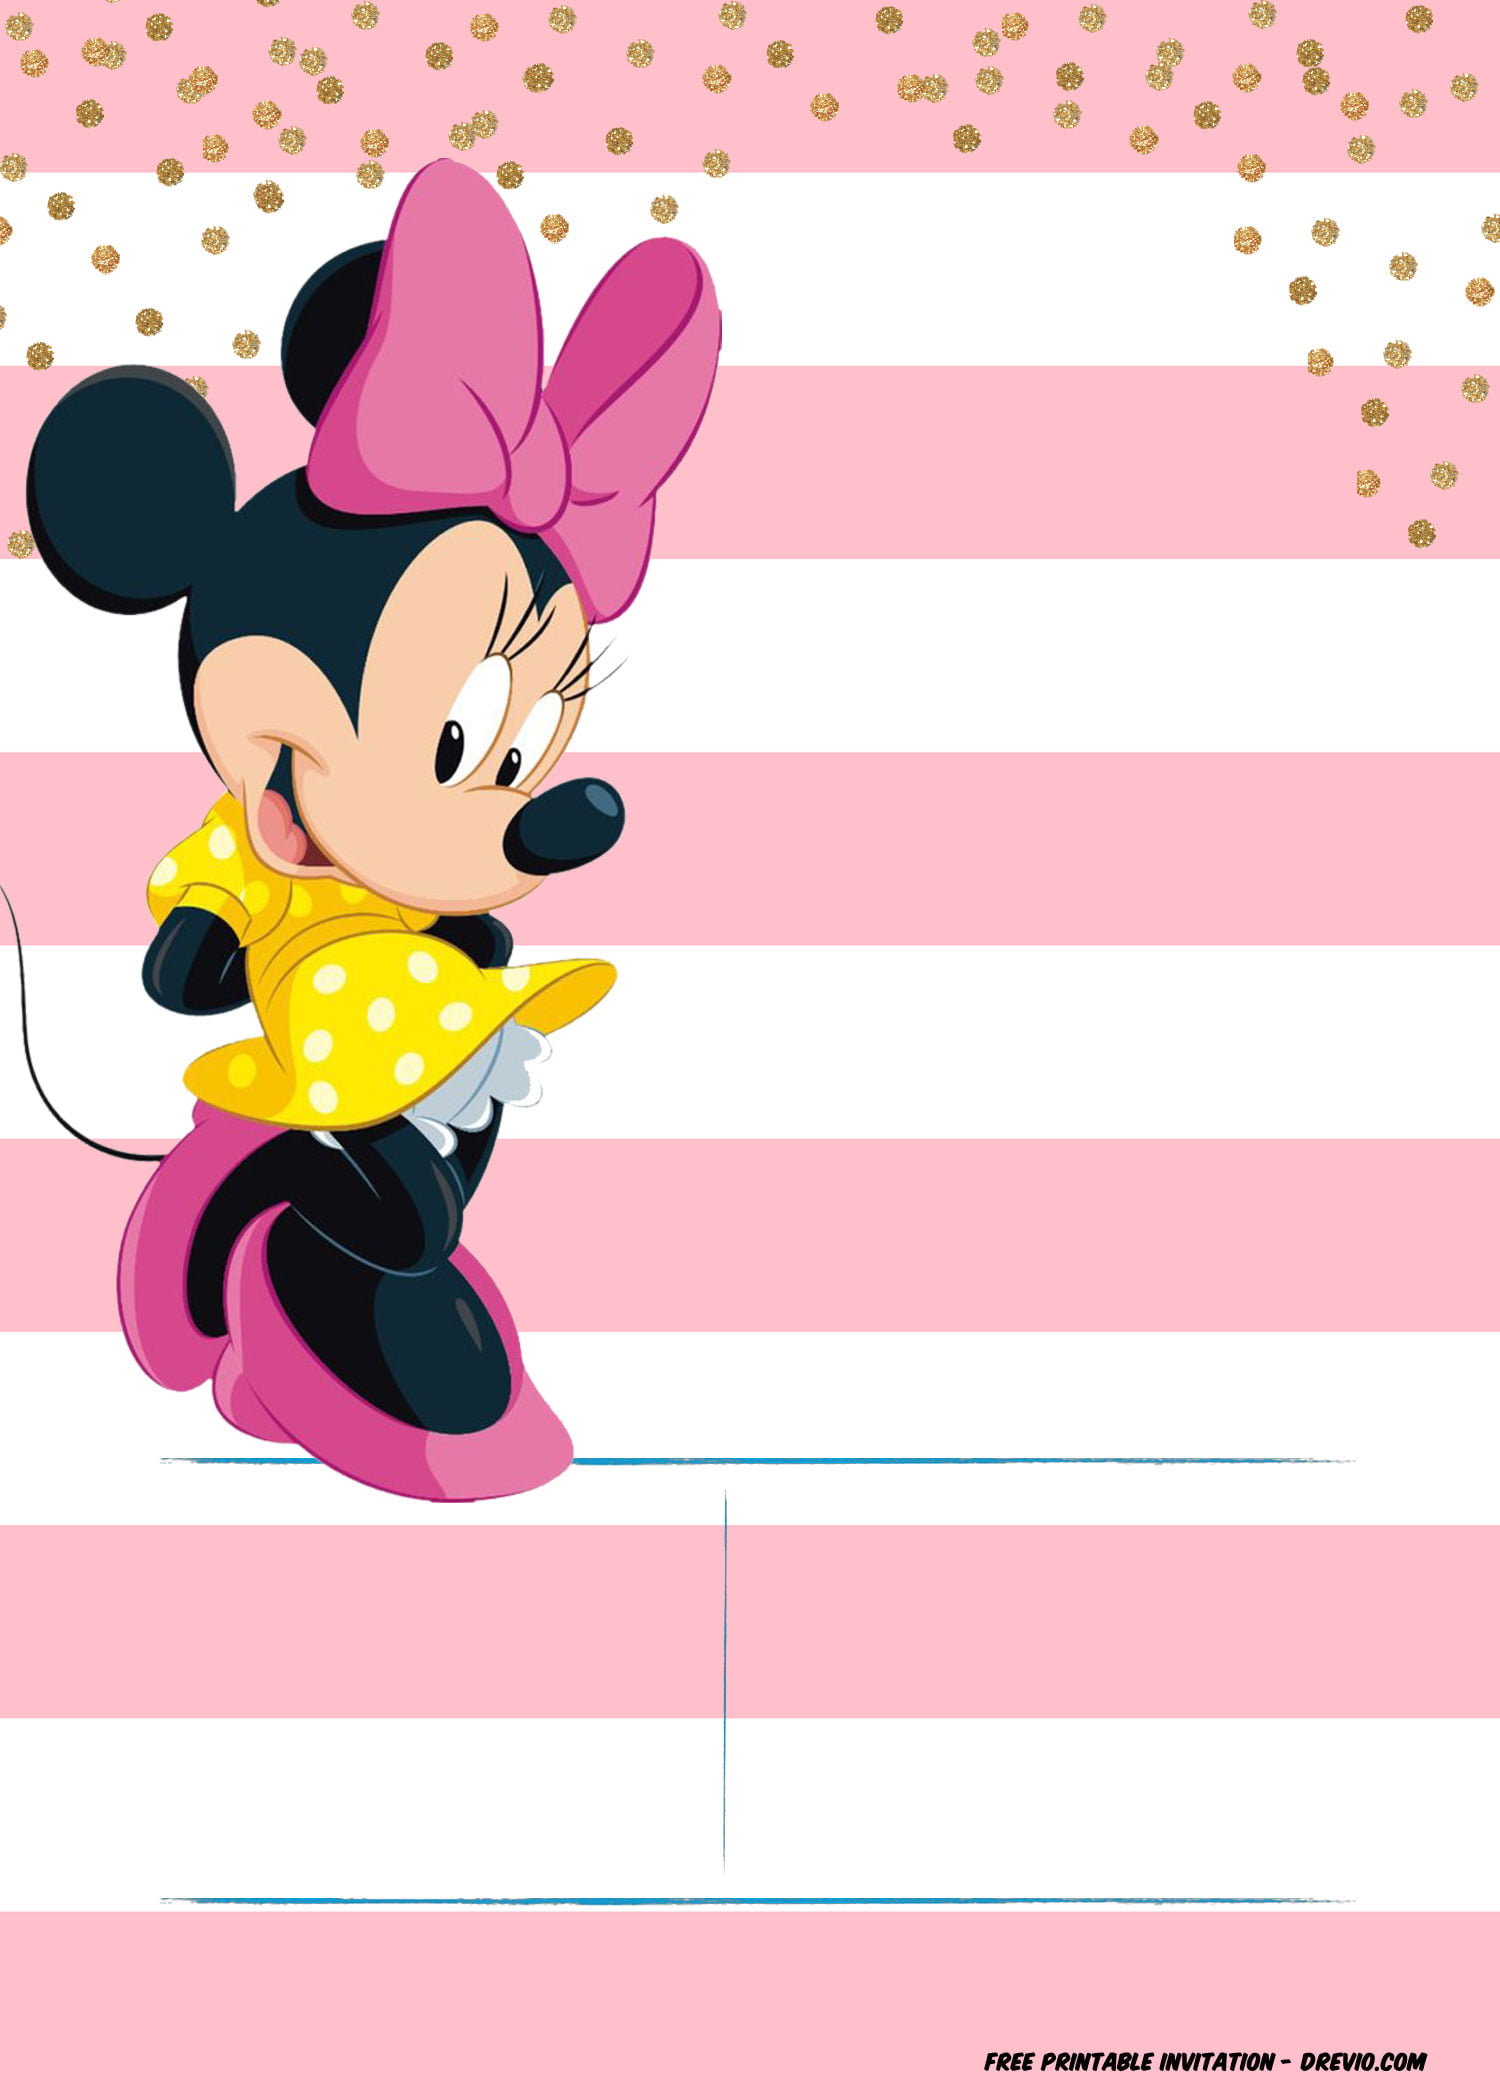 minnie-mouse-invitation-template-editable-and-free-download-download-hundreds-free-printable